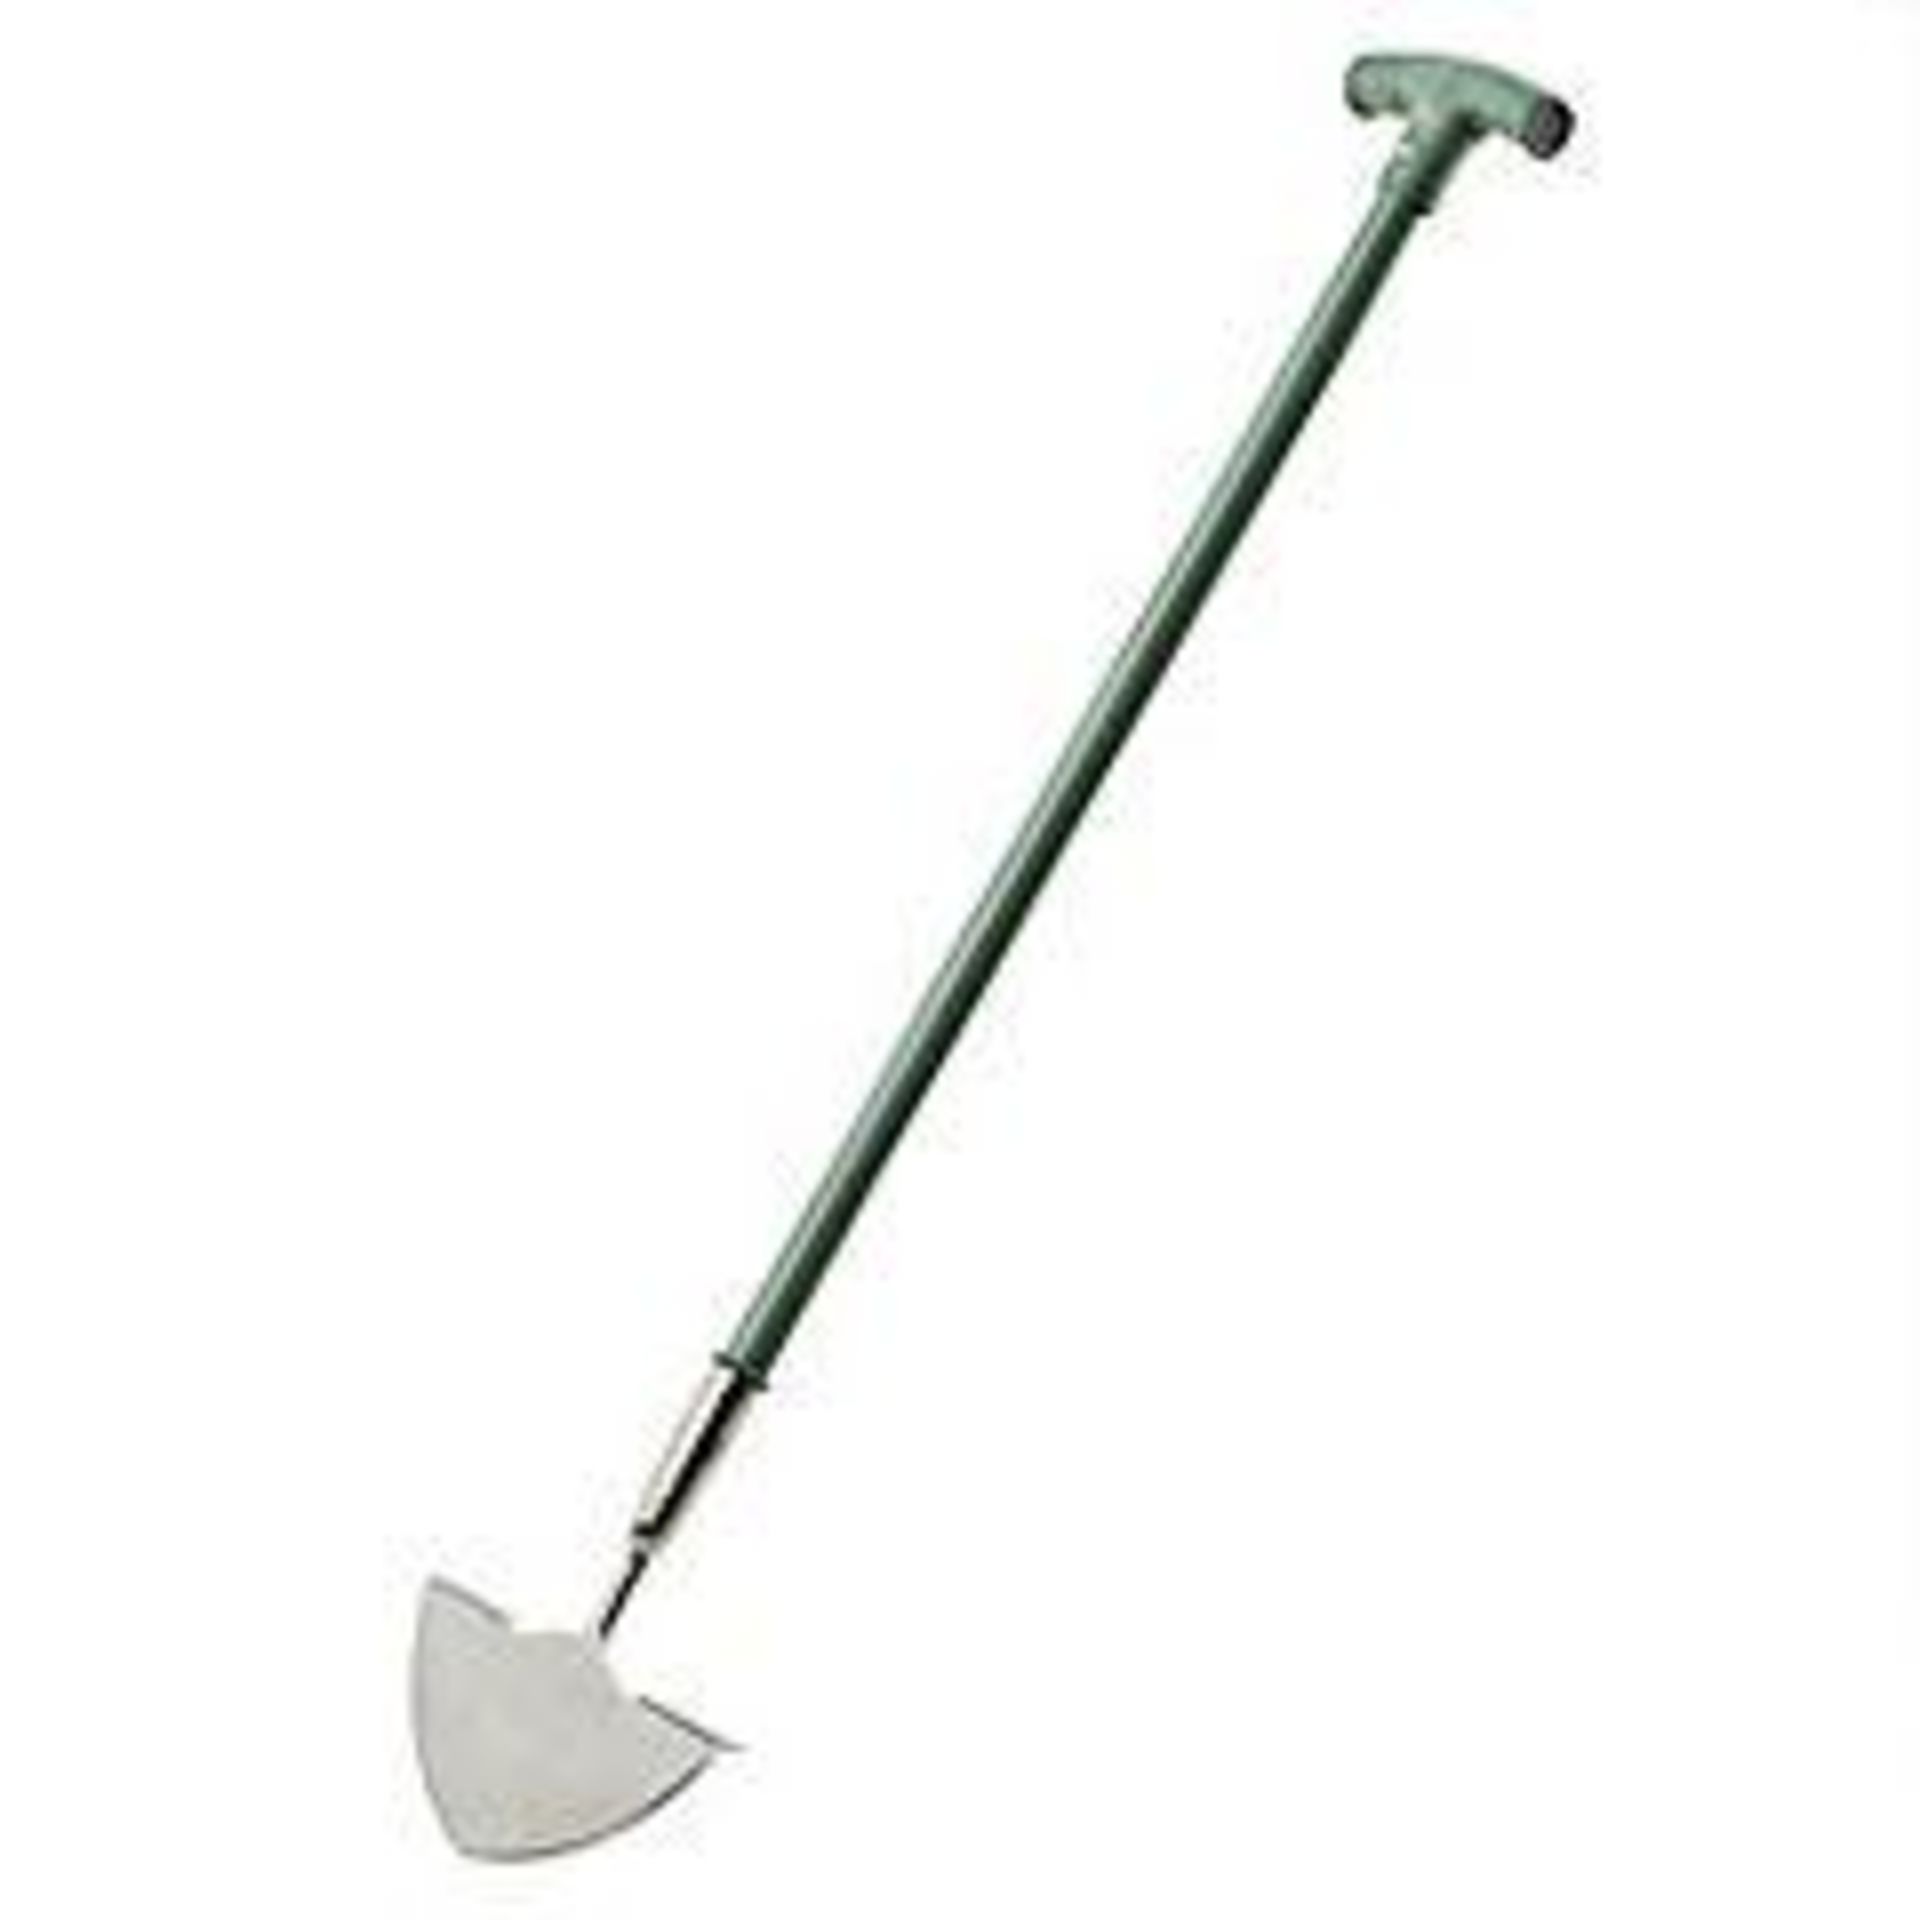 V Brand New Long Handled Stainless Steel Lawn Edger X 2 Bid price to be multiplied by Two